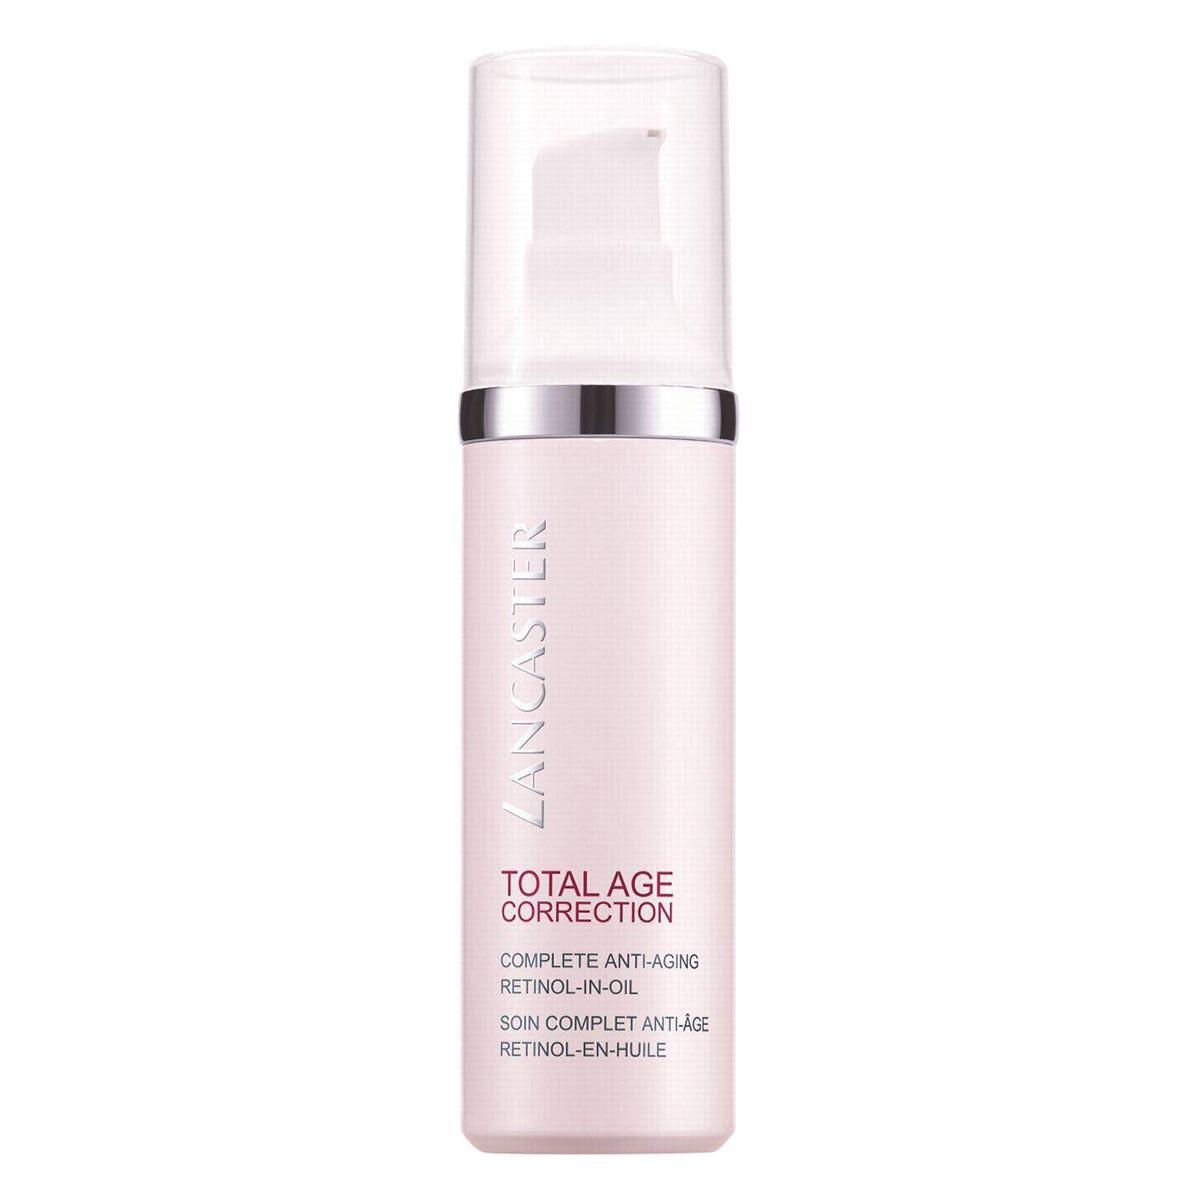 lancaster-total-age-correction-complete-antiaging-retinol-in-oil-50ml